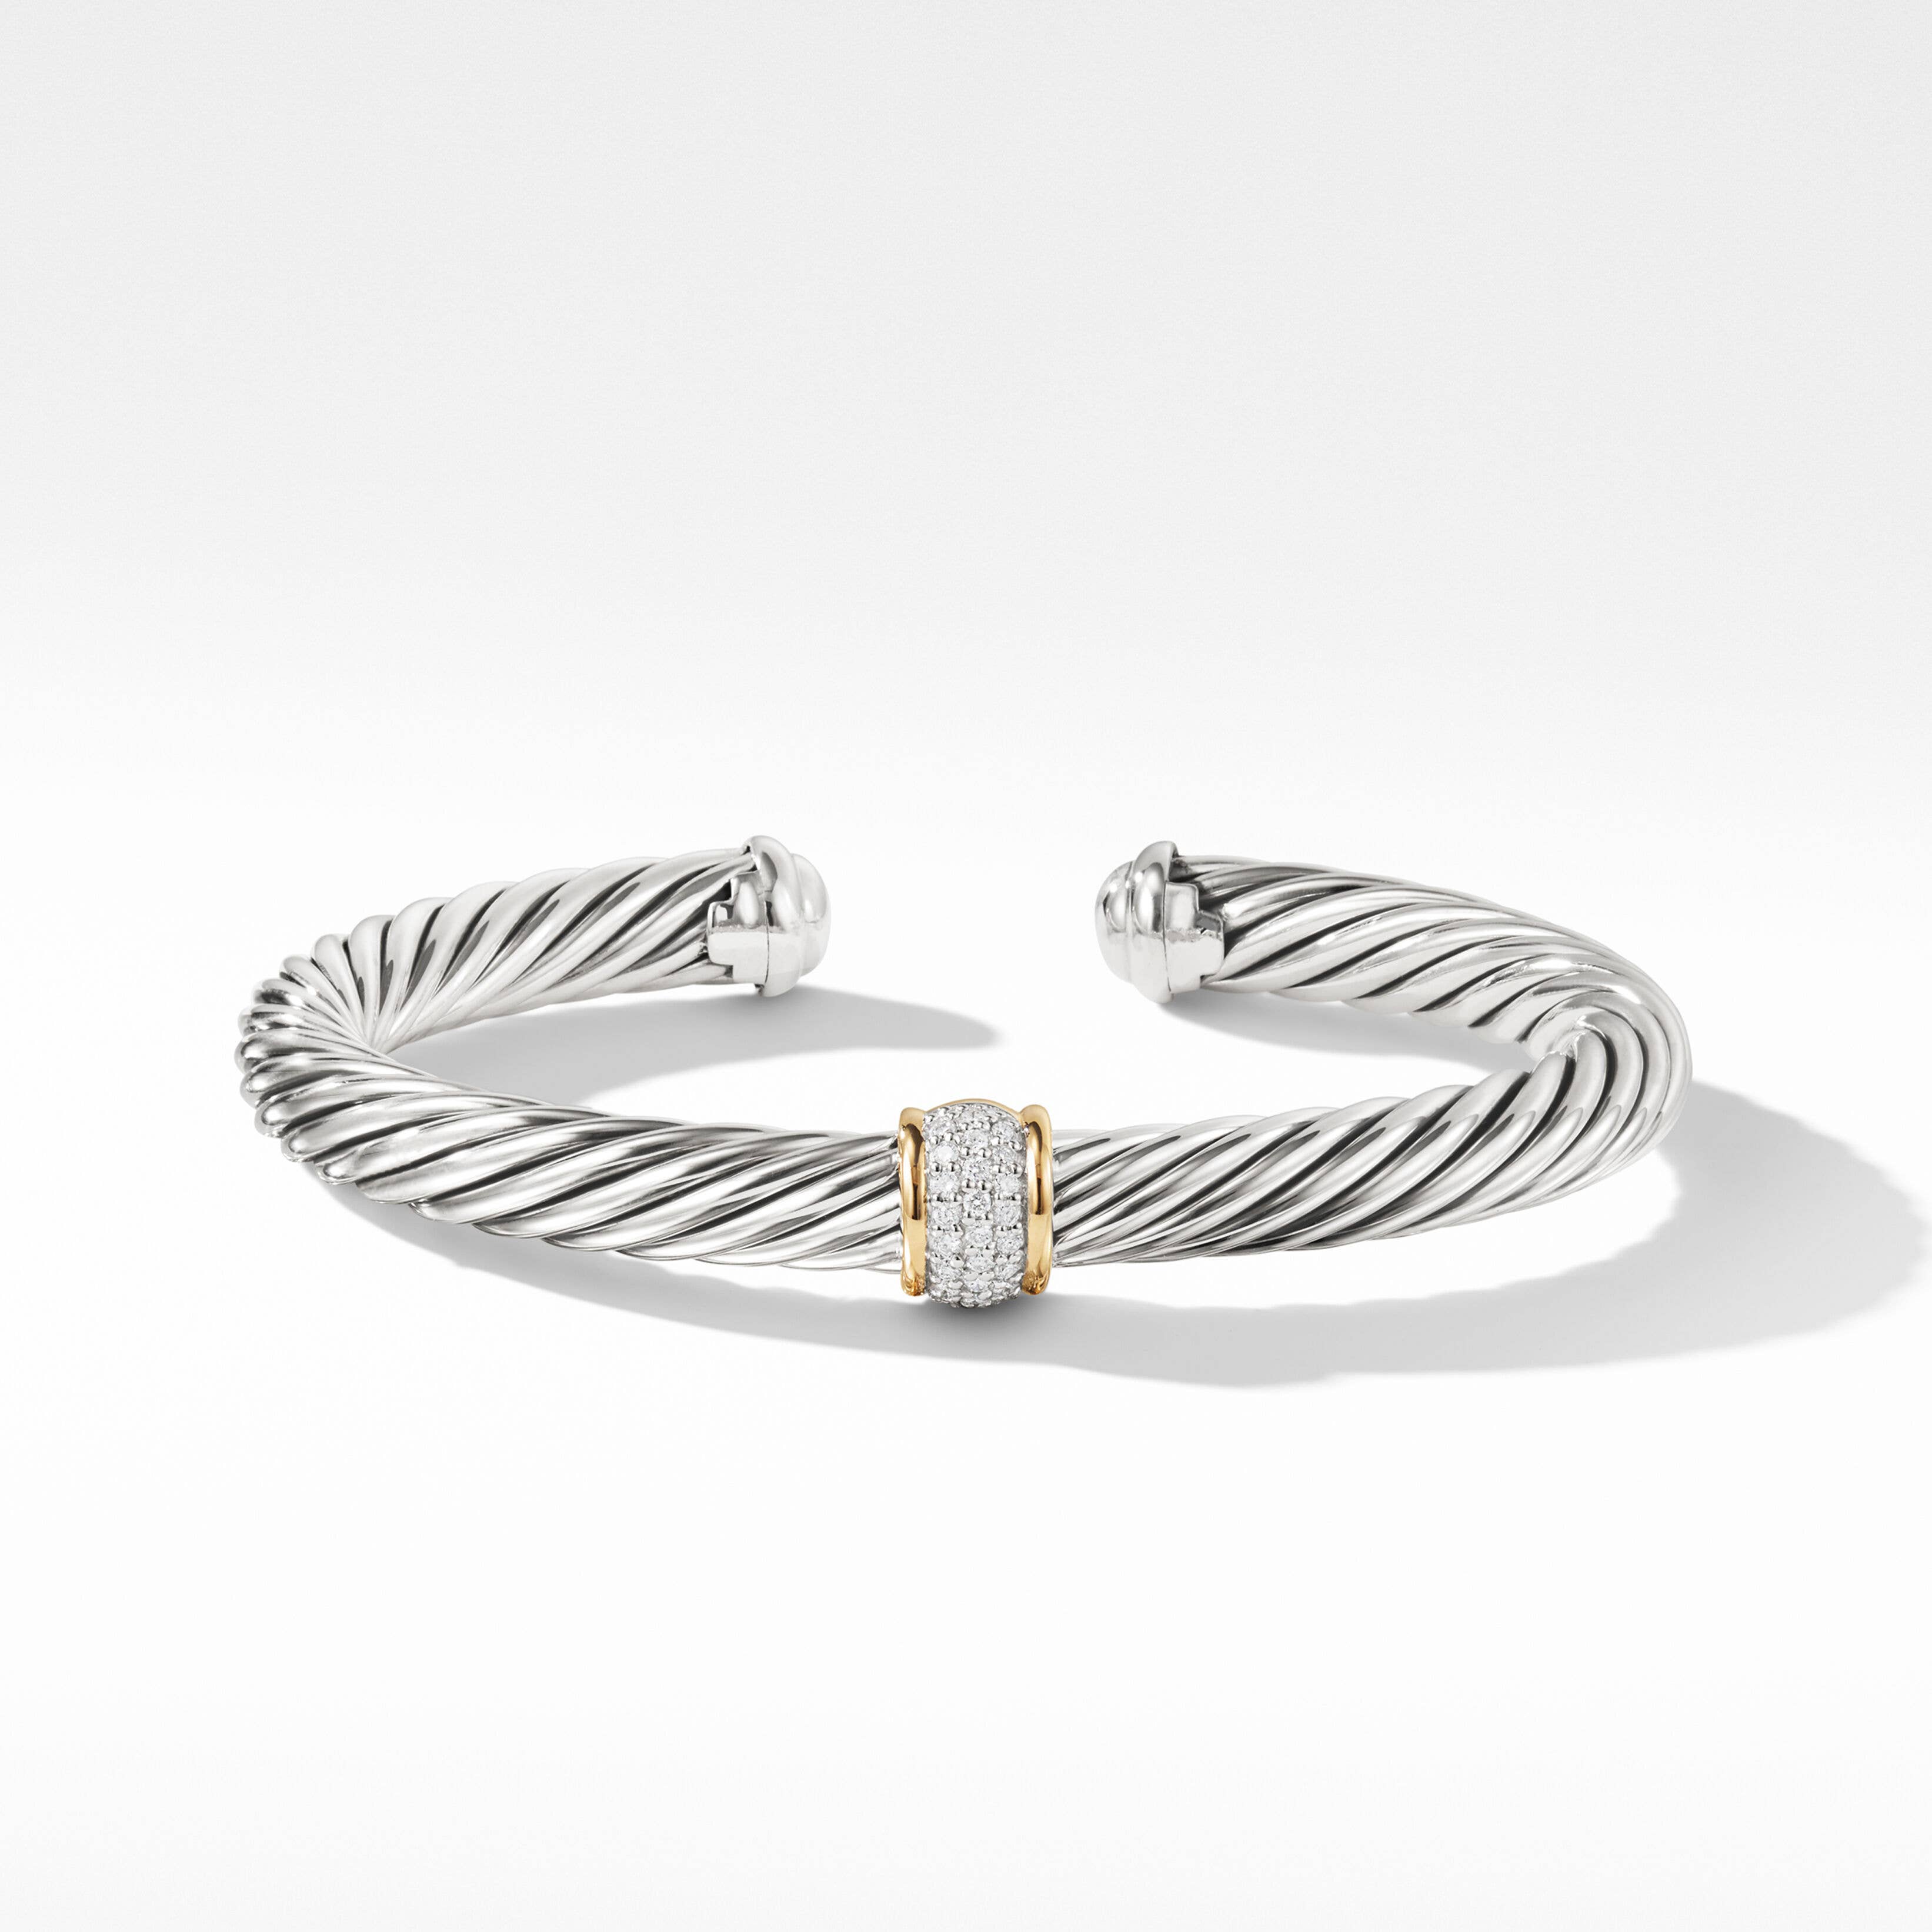 Cable Classics Bracelet in Sterling Silver with Pavé Diamond Station and 18K Yellow Gold